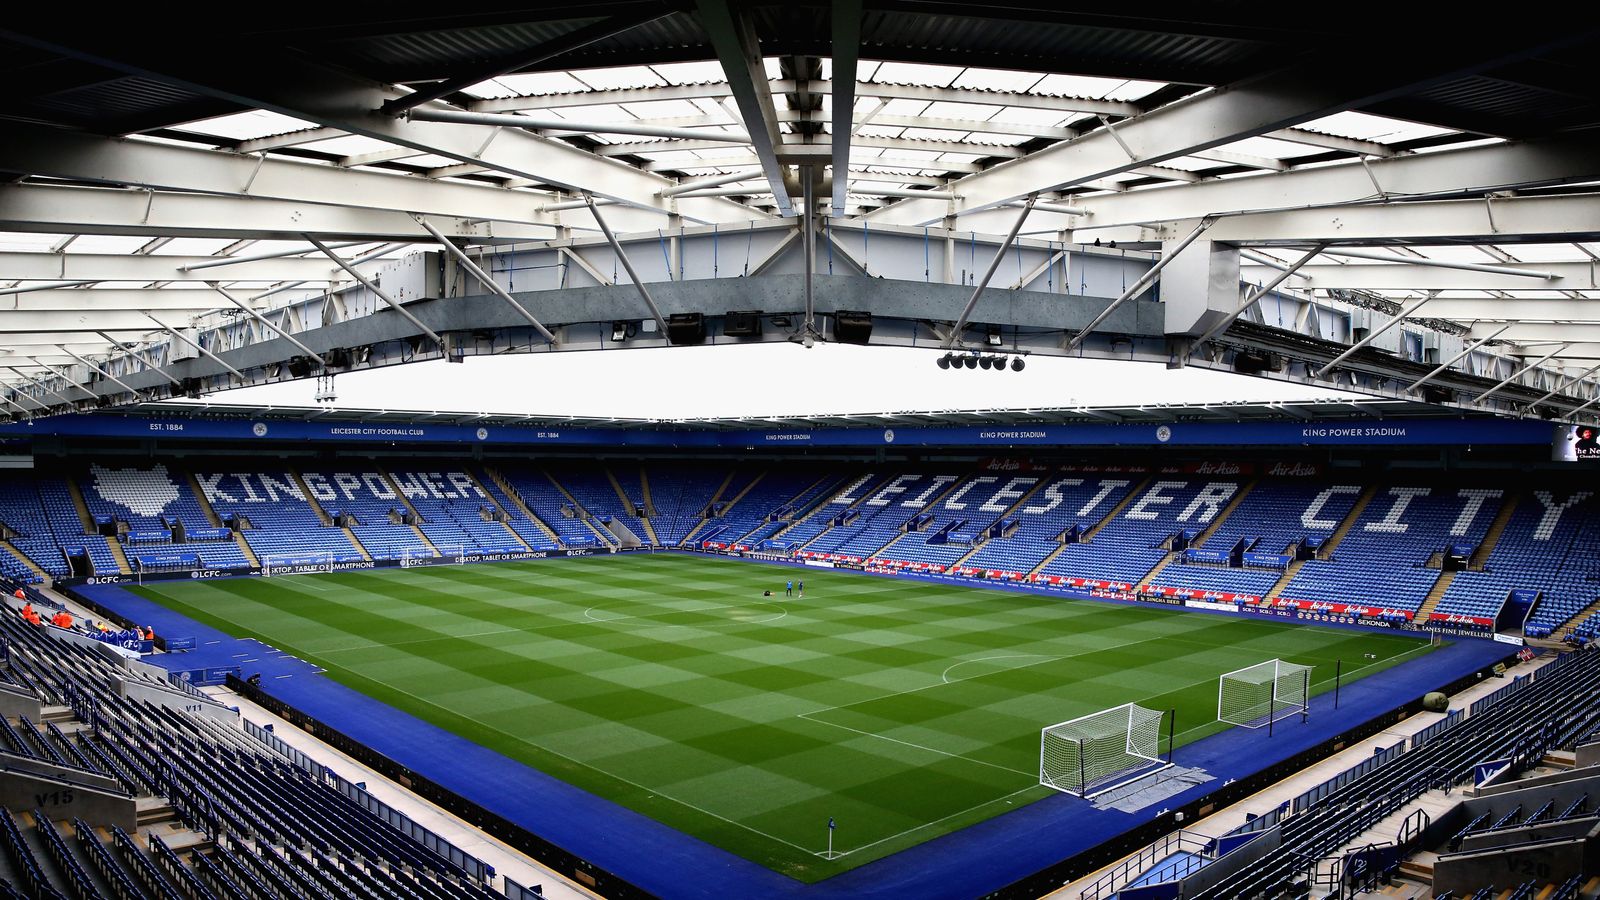 England set to face Switzerland at Leicester's King Power Stadium